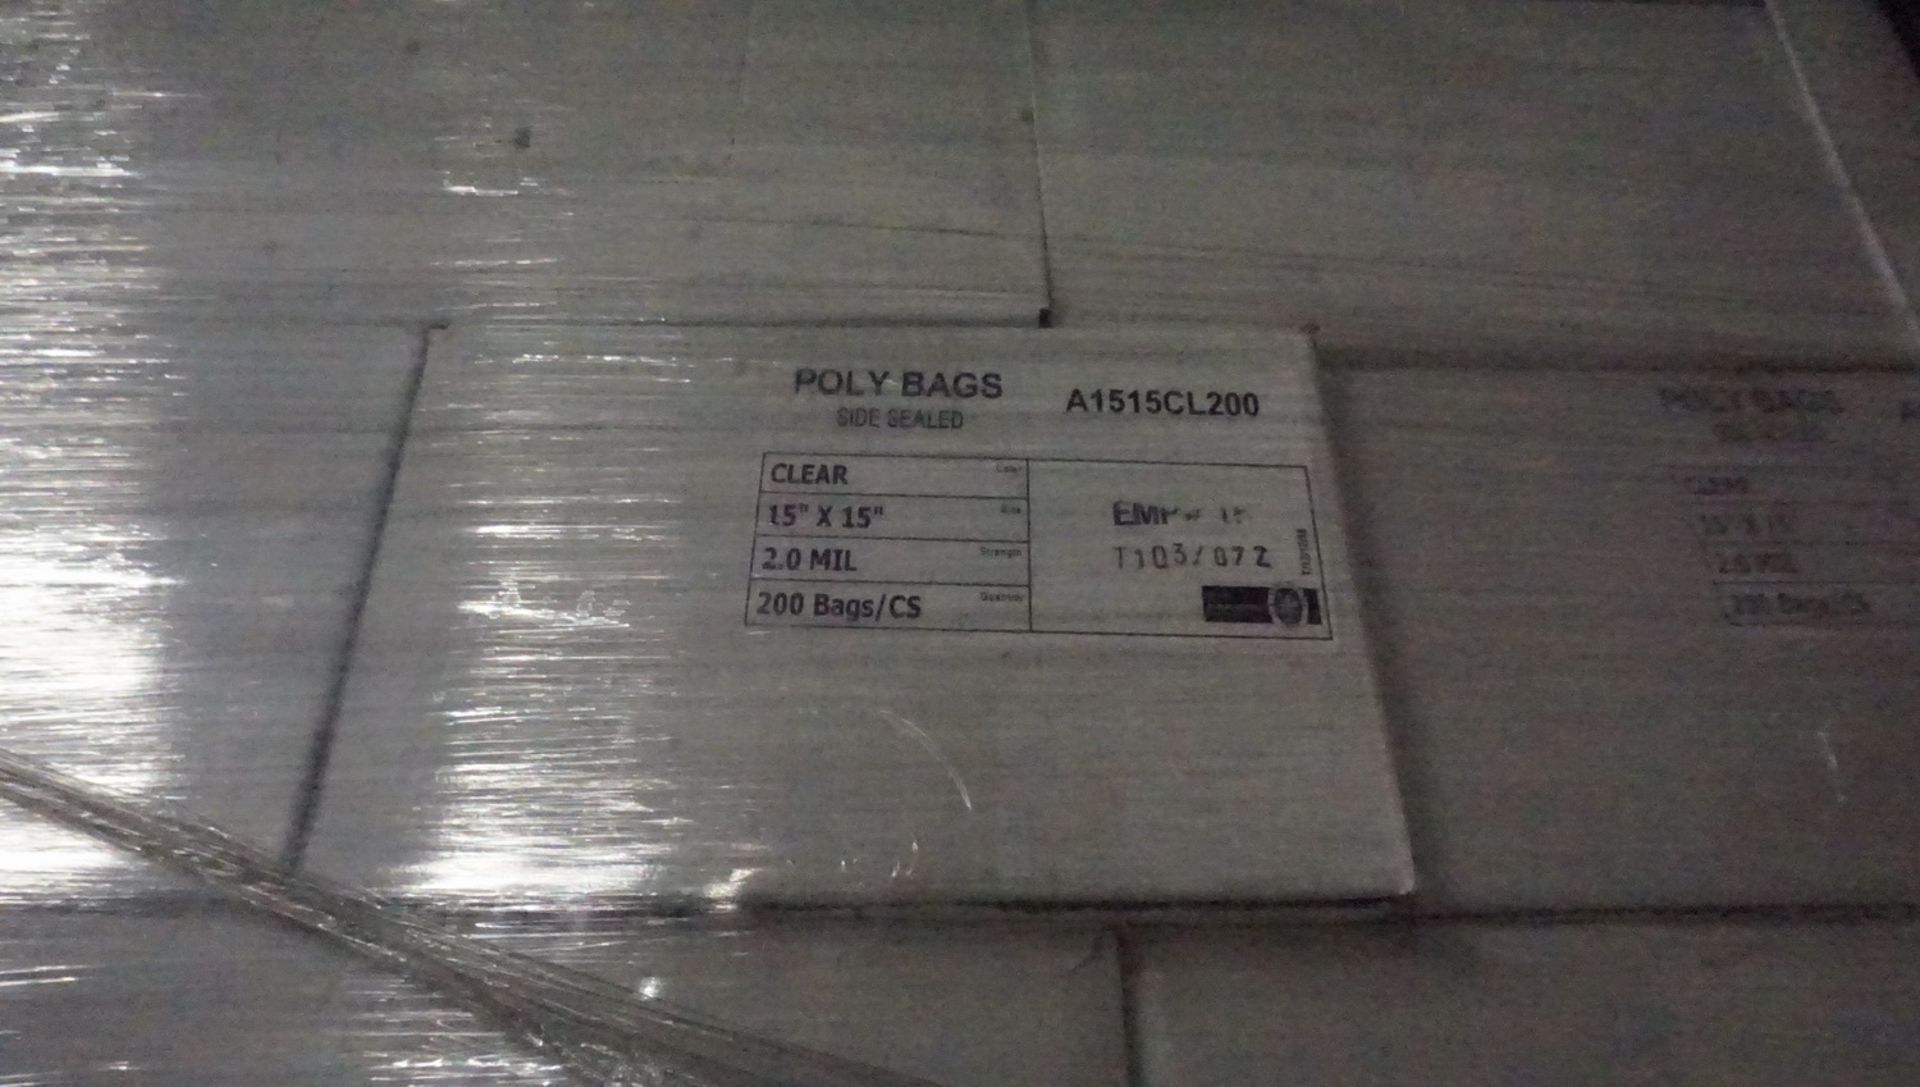 BOXES - CLEAR 15 X 15" 2.0MIL POLY BAGS (200 BAGS / BOX) - Image 2 of 2